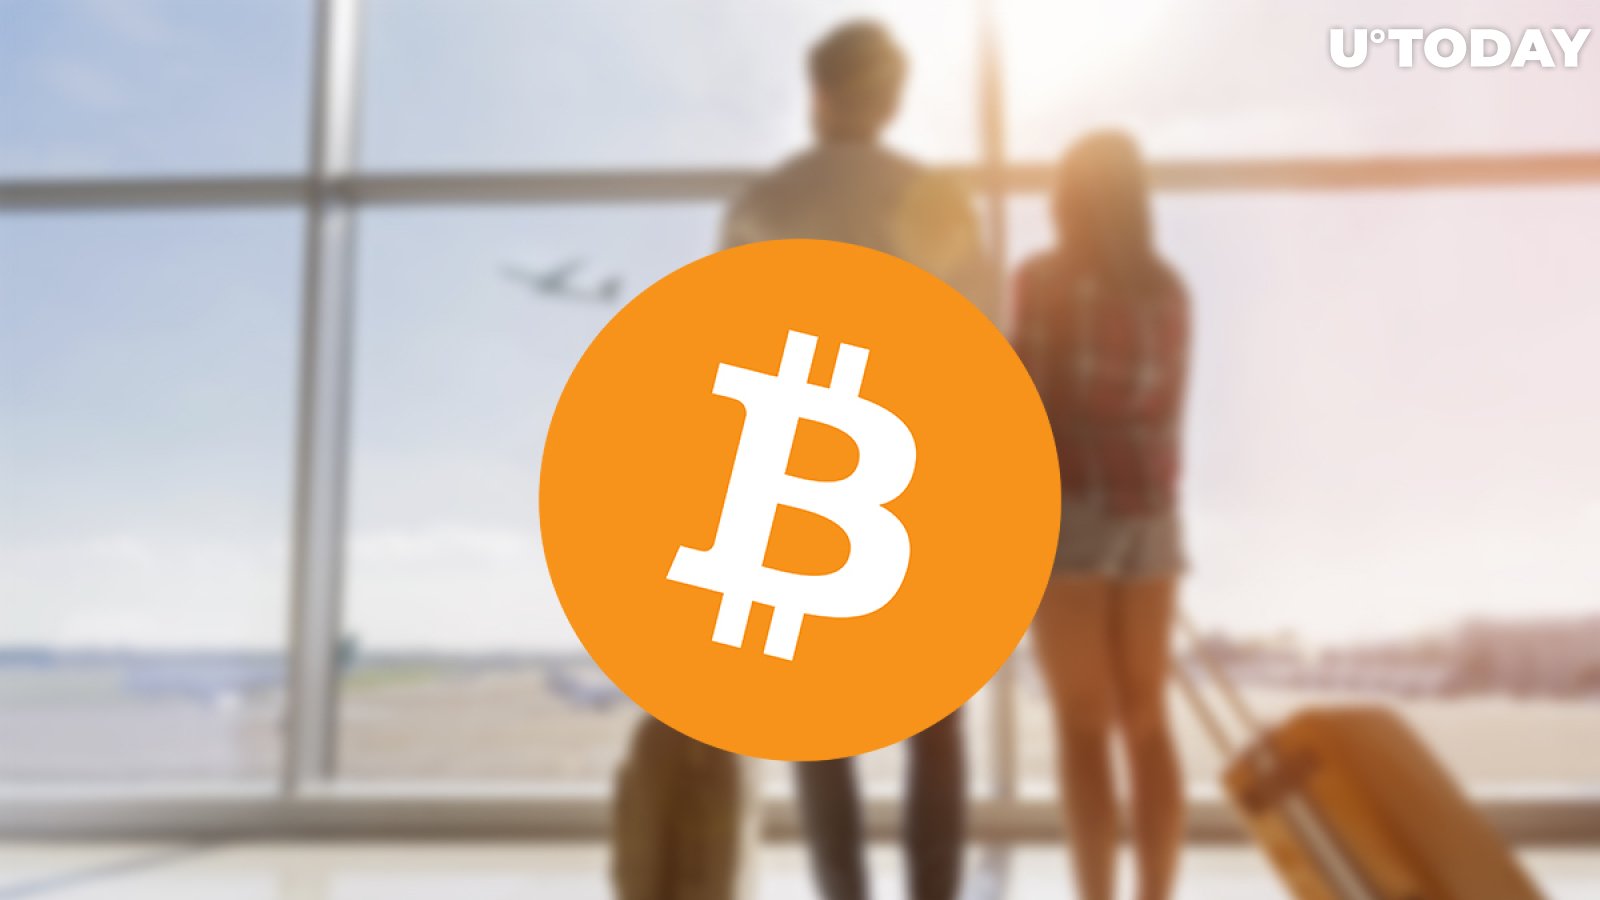 Roger Ver’s Bitcoin.com Wallet Partners with Travala to Let Travellers Save on Hotel Bookings